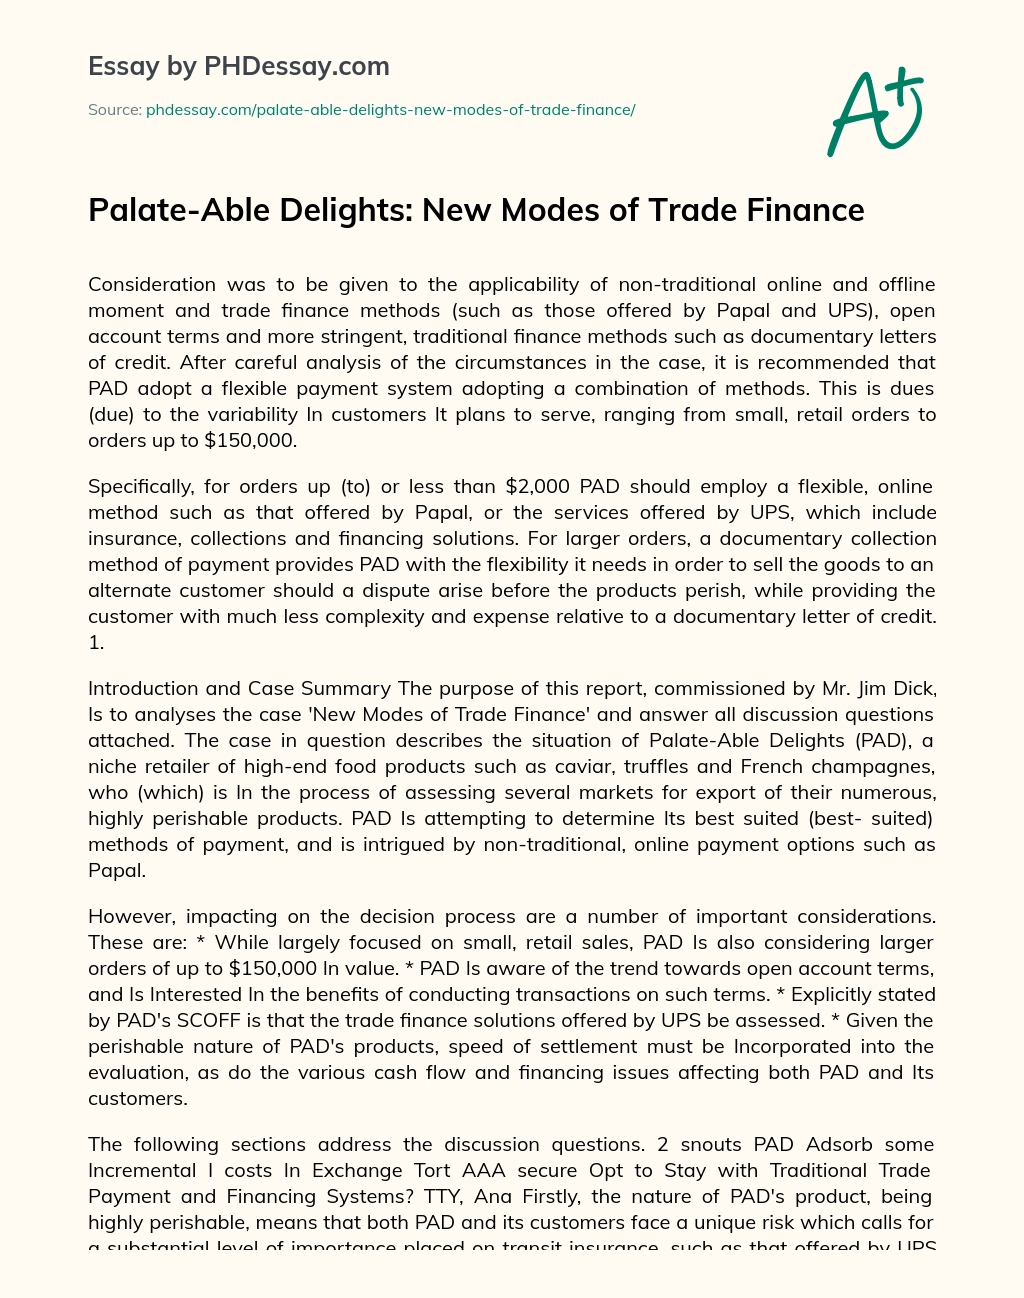 Palate-Able Delights: New Modes of Trade Finance essay